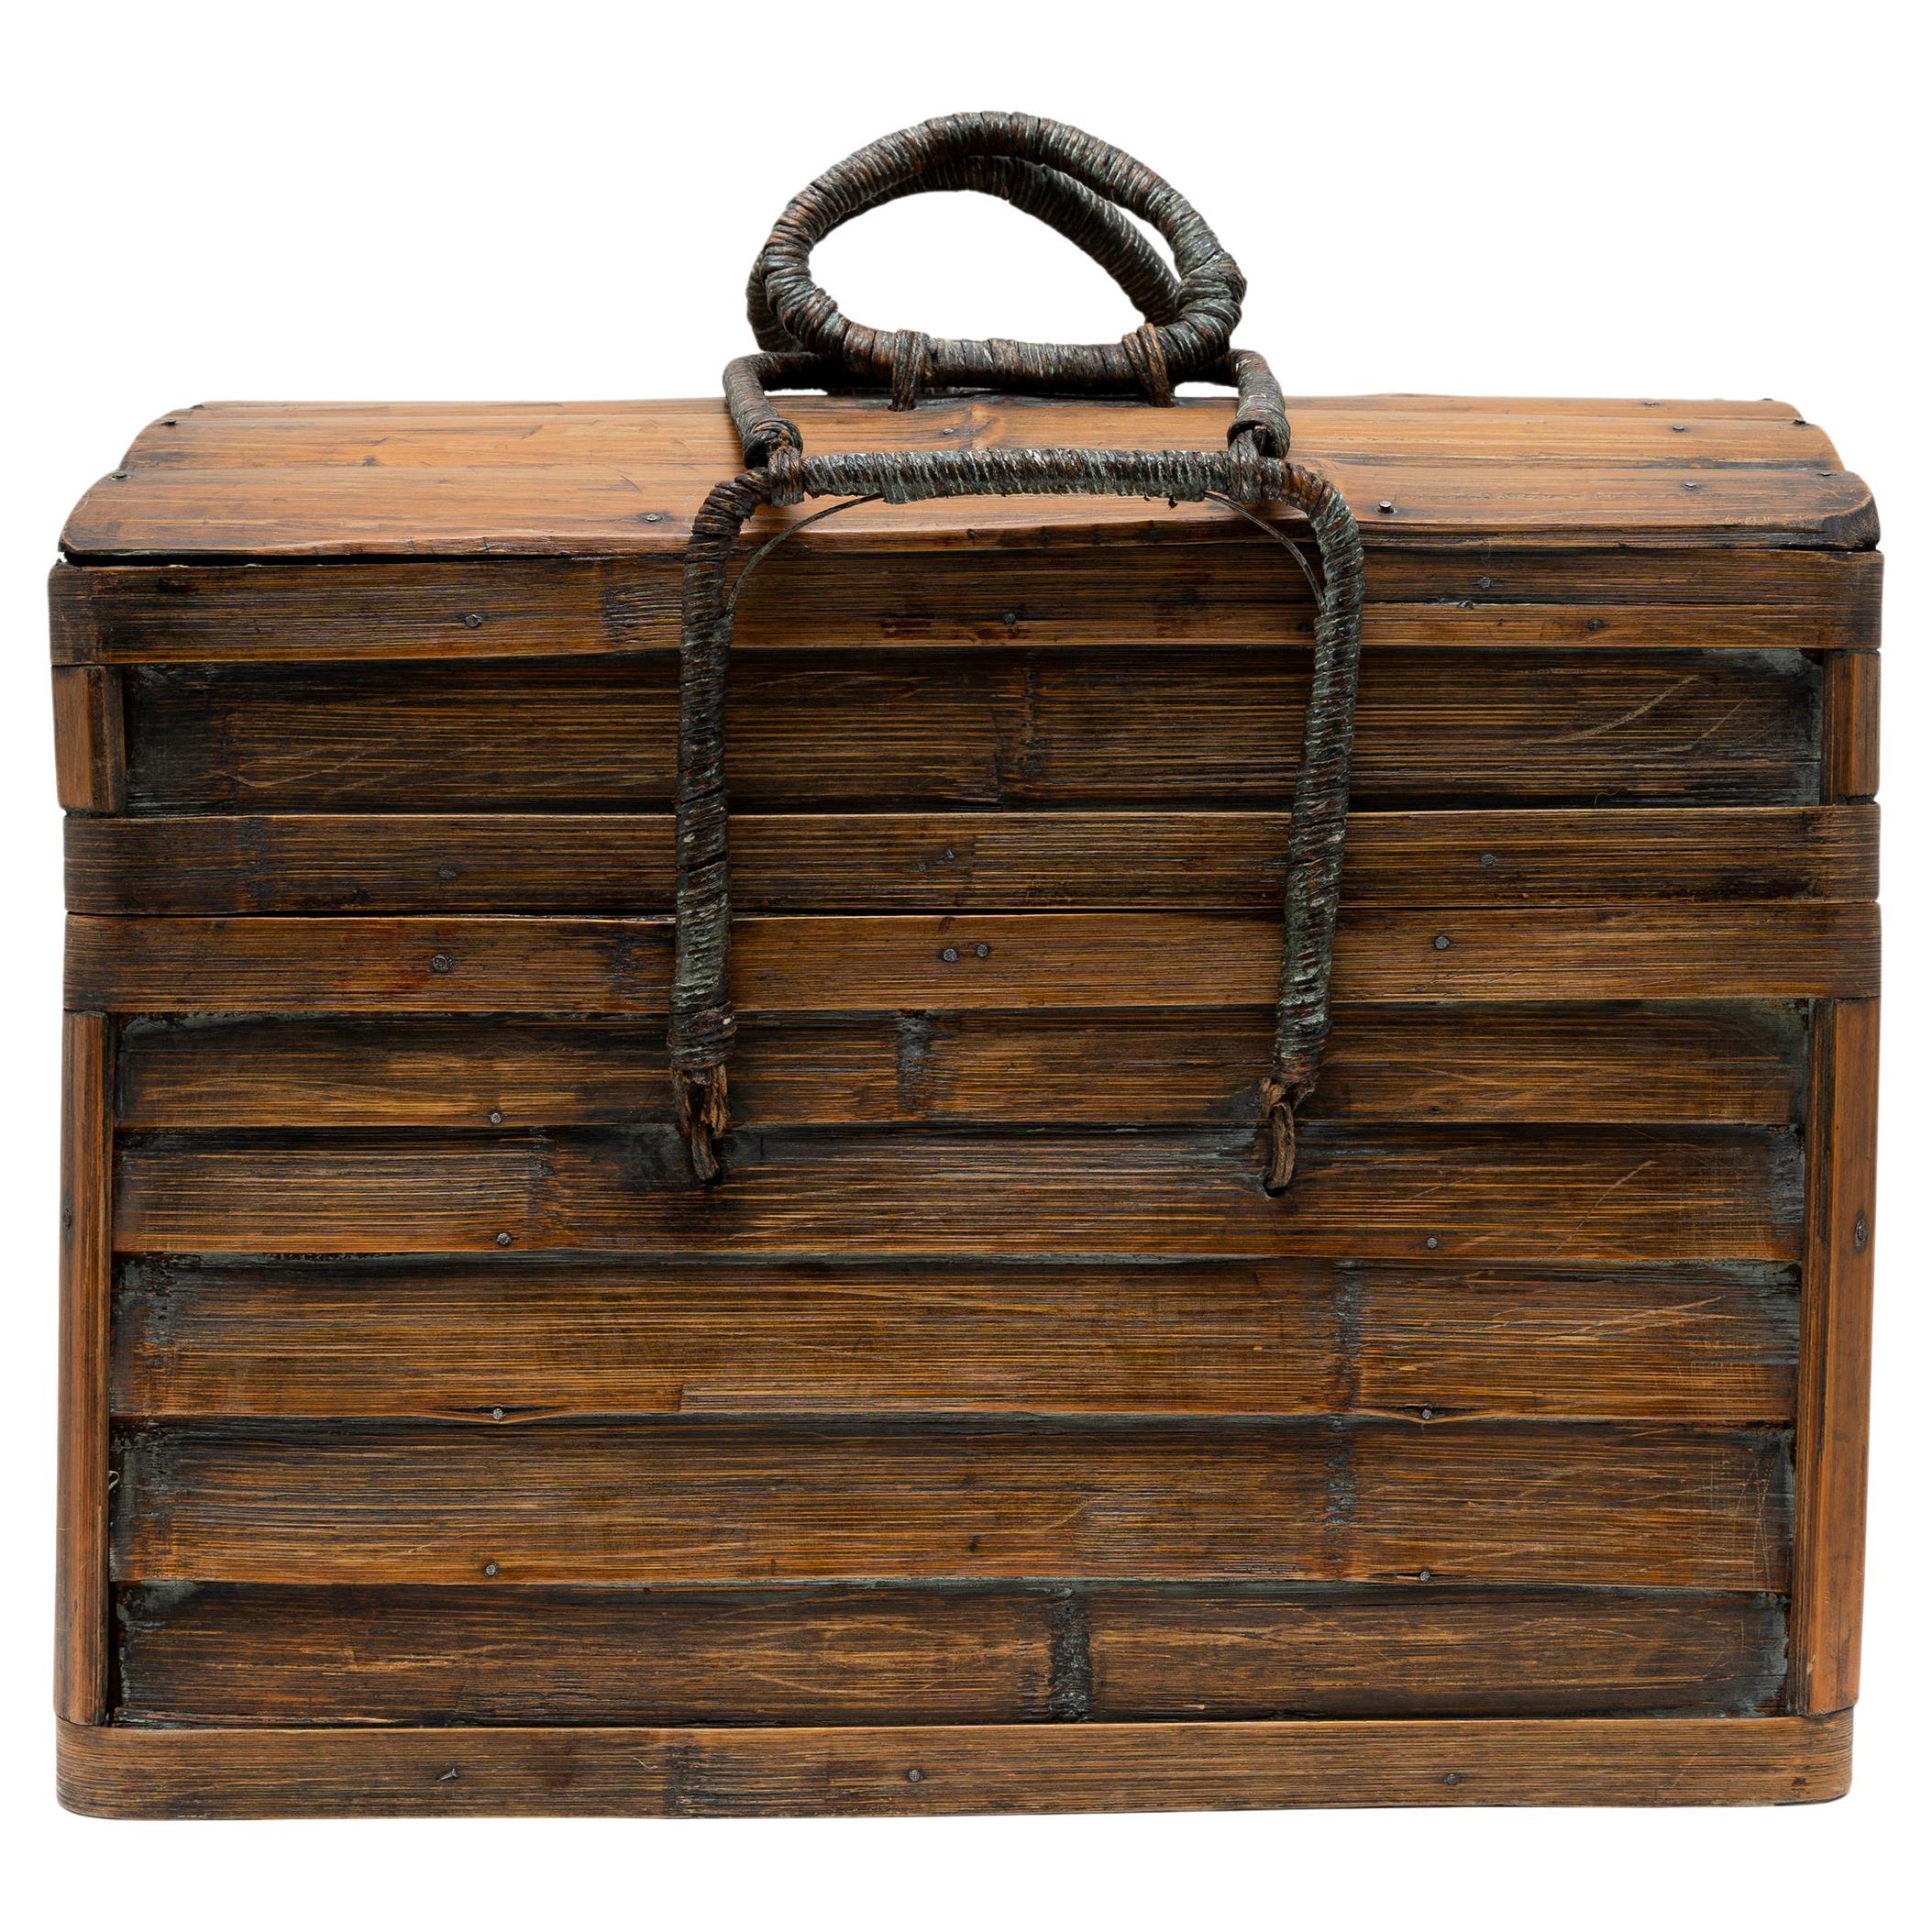 This rustic wooden chest is hand crafted of bamboo with ample space to store various household items. The chest opens by a hinged panel on the back, which drops downwards to reveal a large interior compartment. The chest is crafted with handles on